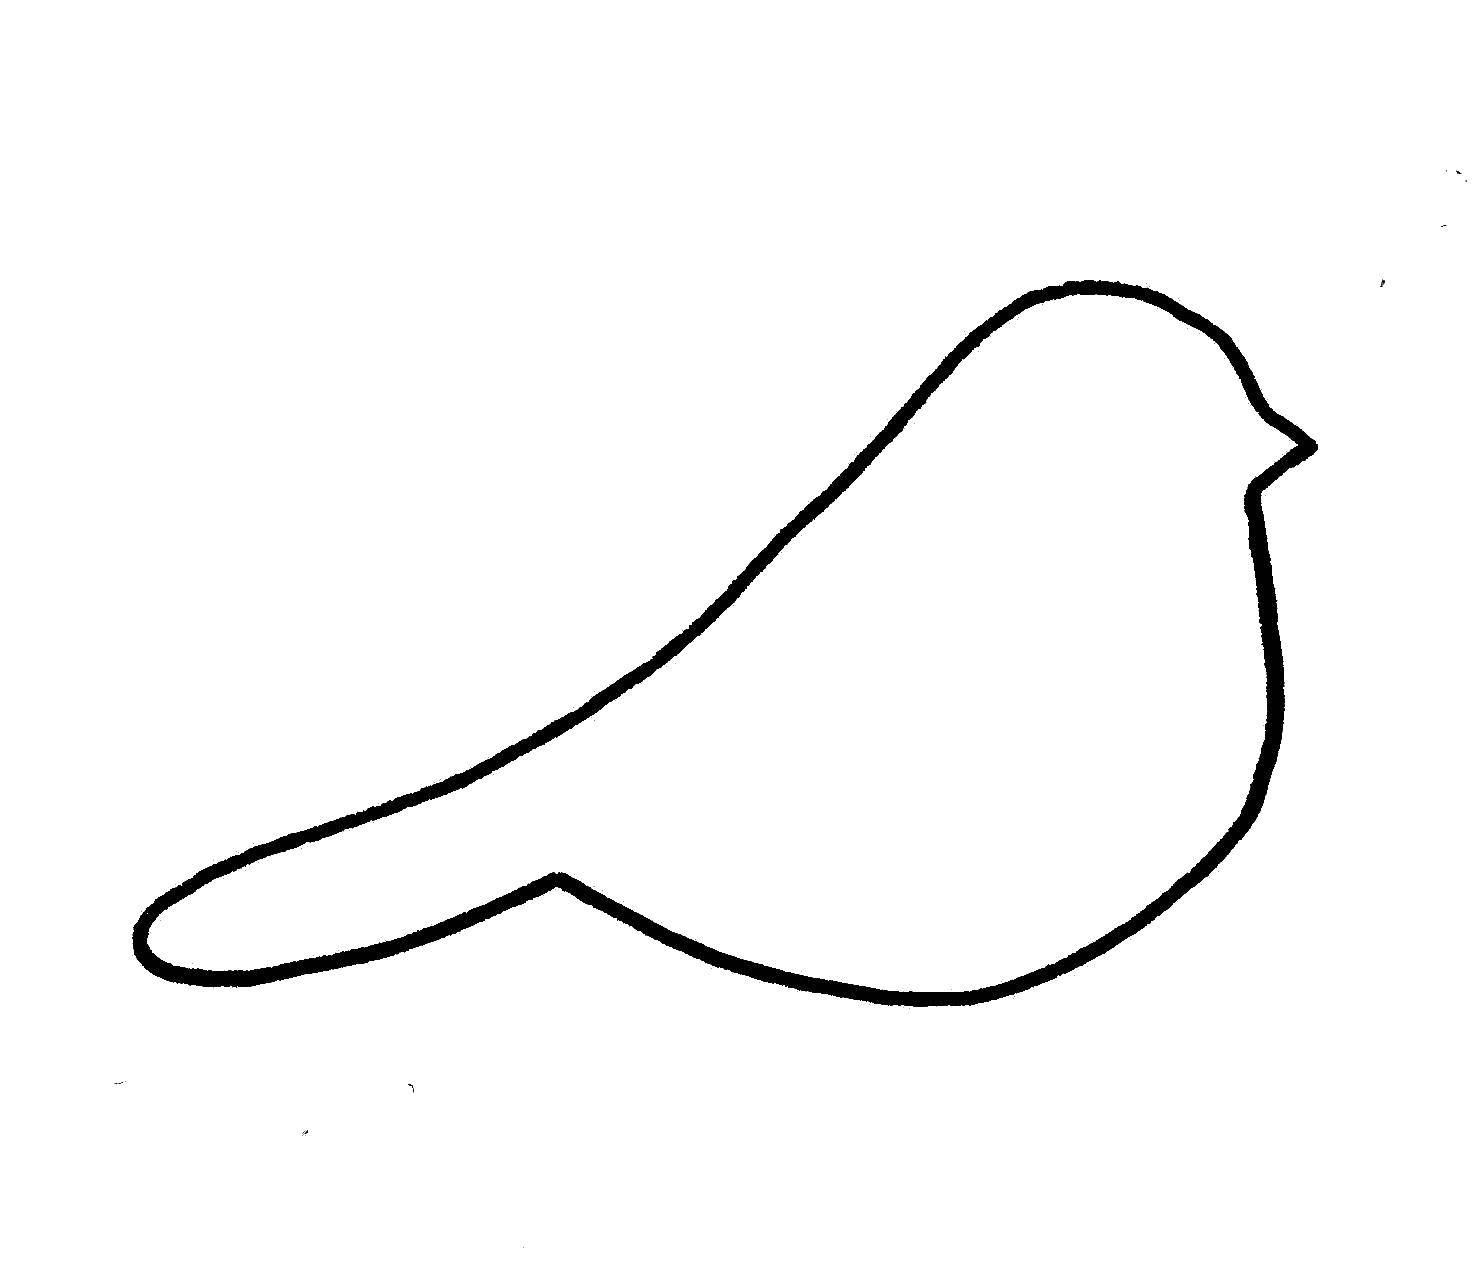 Coloring Outline birds. Category The contours of birds. Tags:  the contours, patterns, birds.